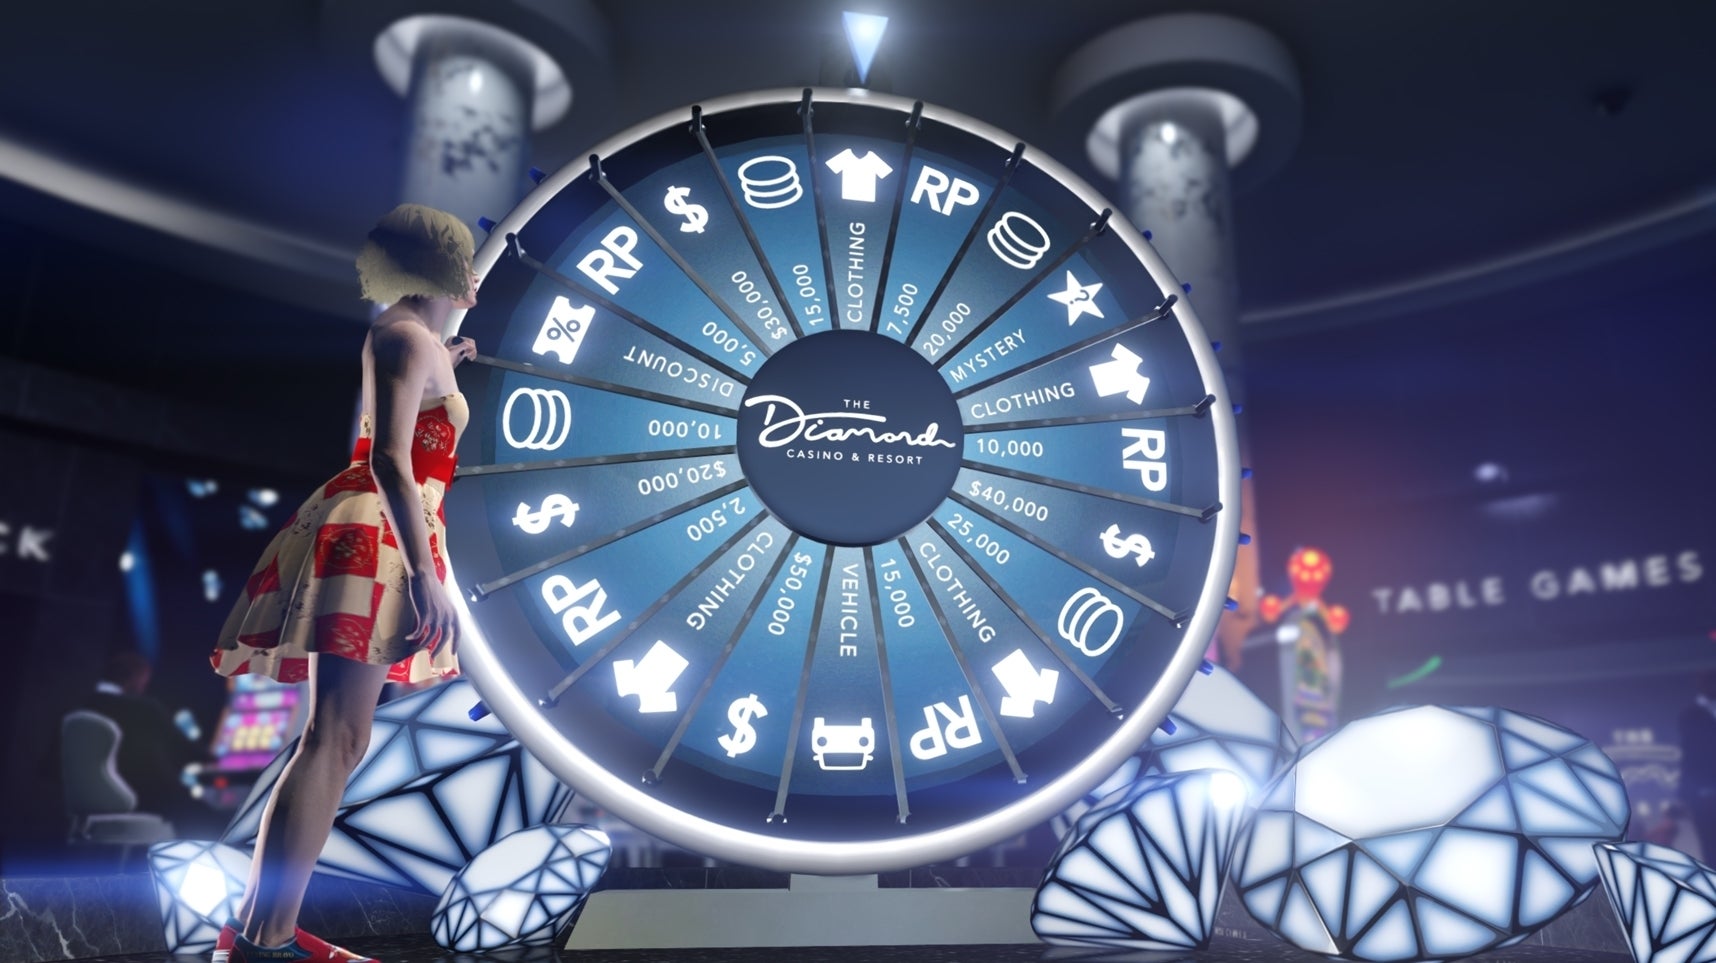 Image for GTA's casino isn't the worst of gambling in games - but it puts it in perspective